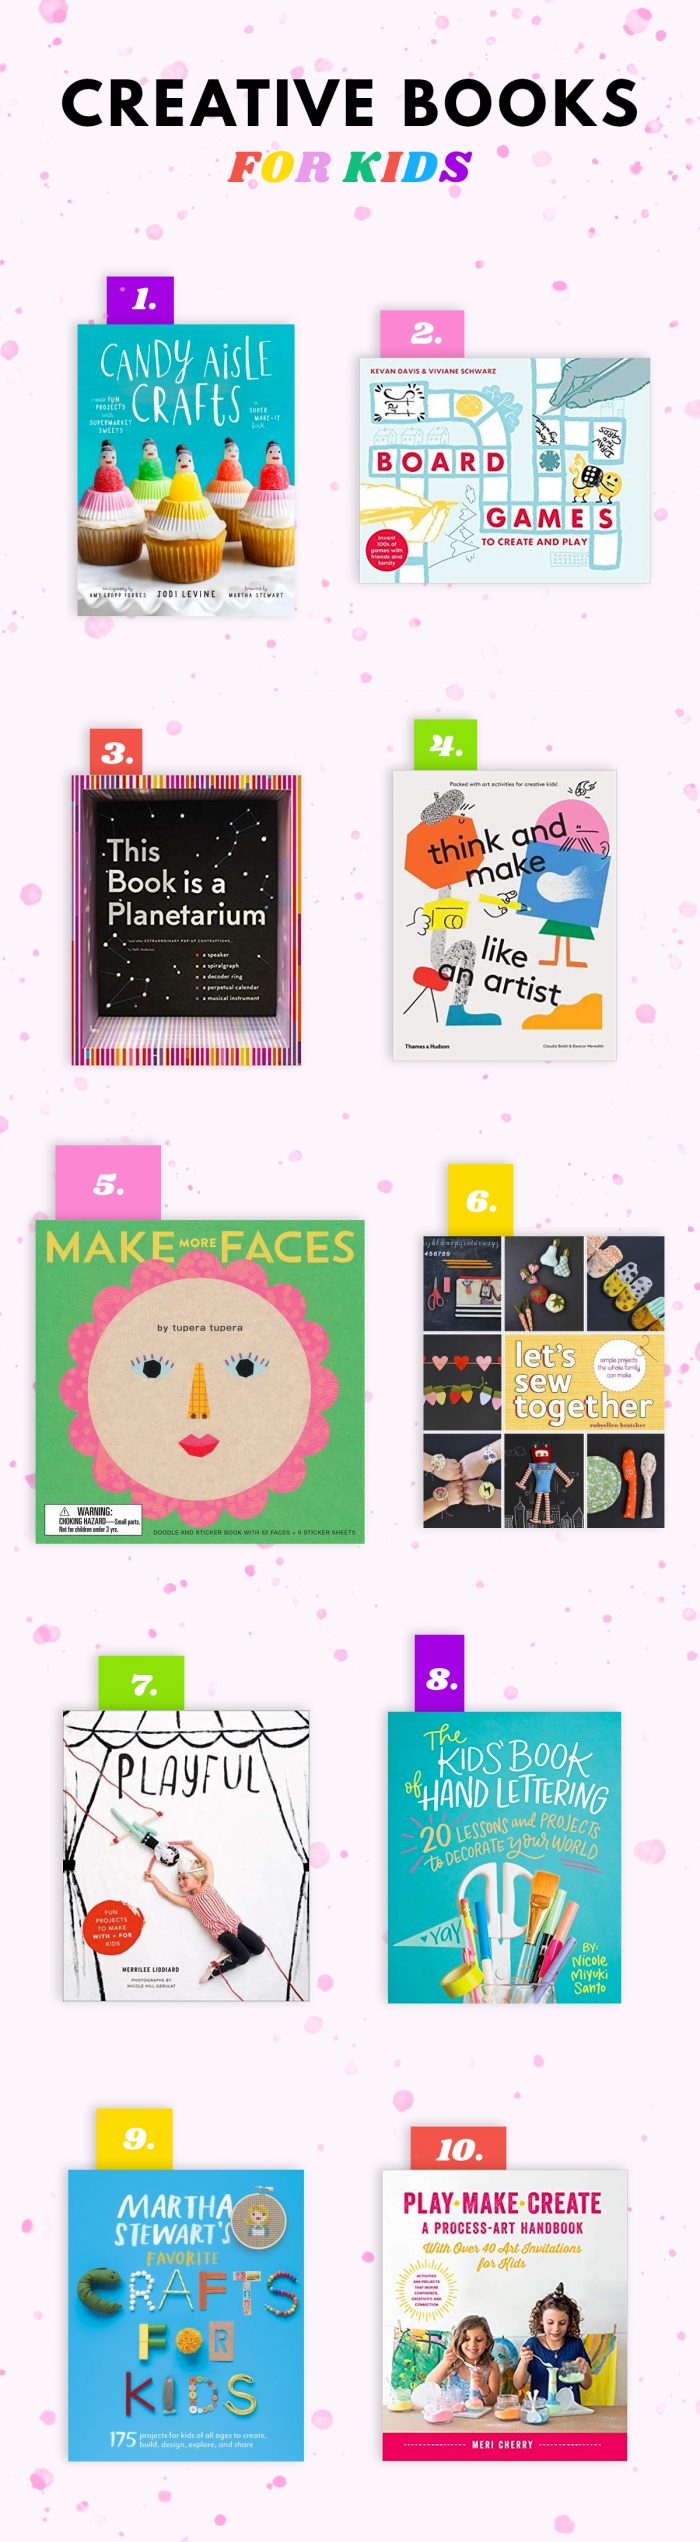 Creative Books for Kids and Teens